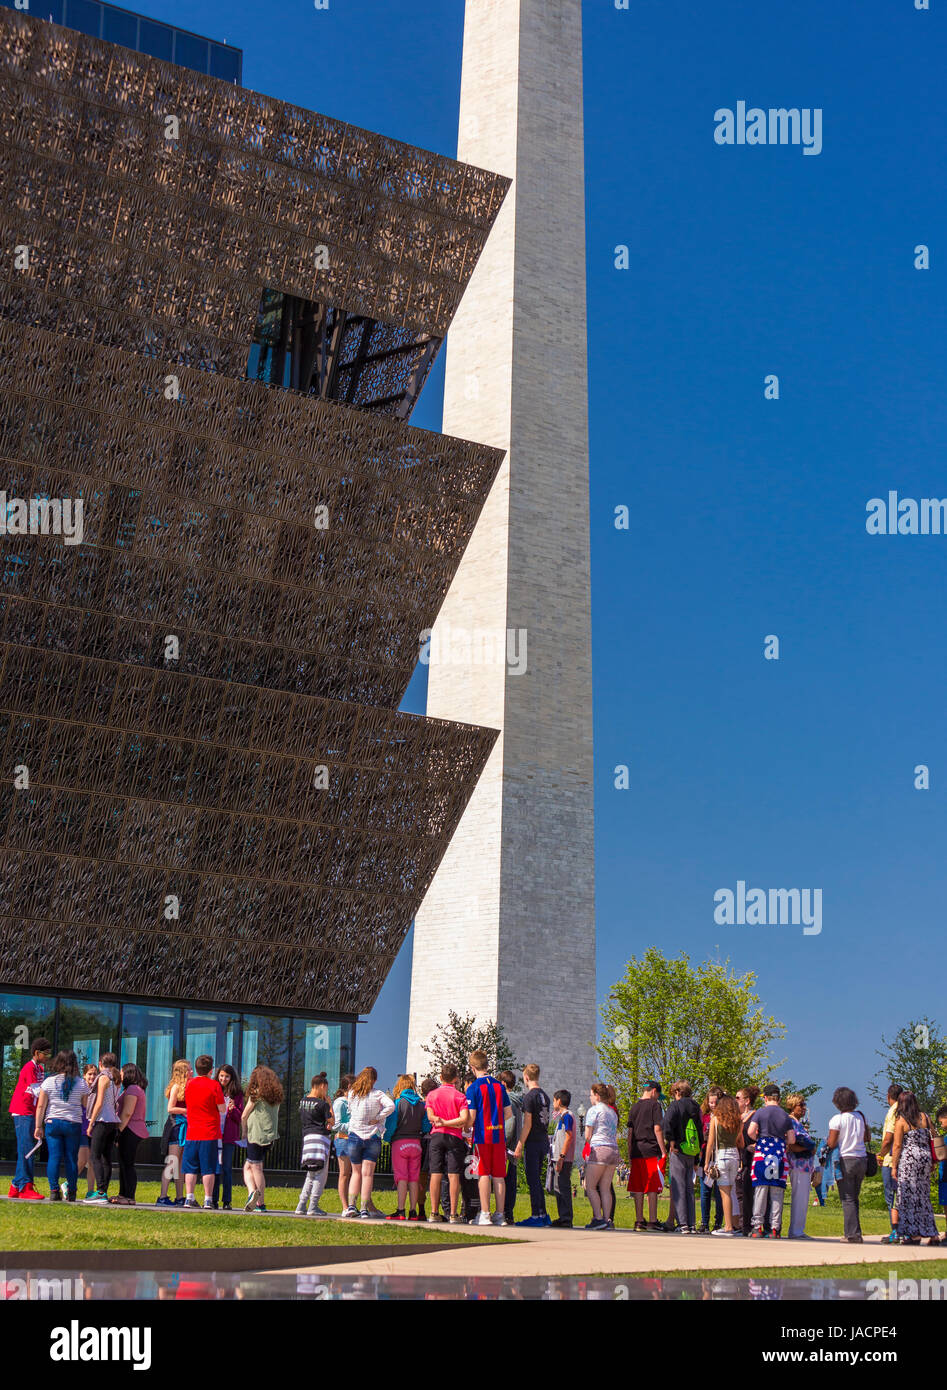 WASHINGTON, DC, USA - Smithsonian National Museum of African American History and Culture, and visitors waiting in line. Stock Photo